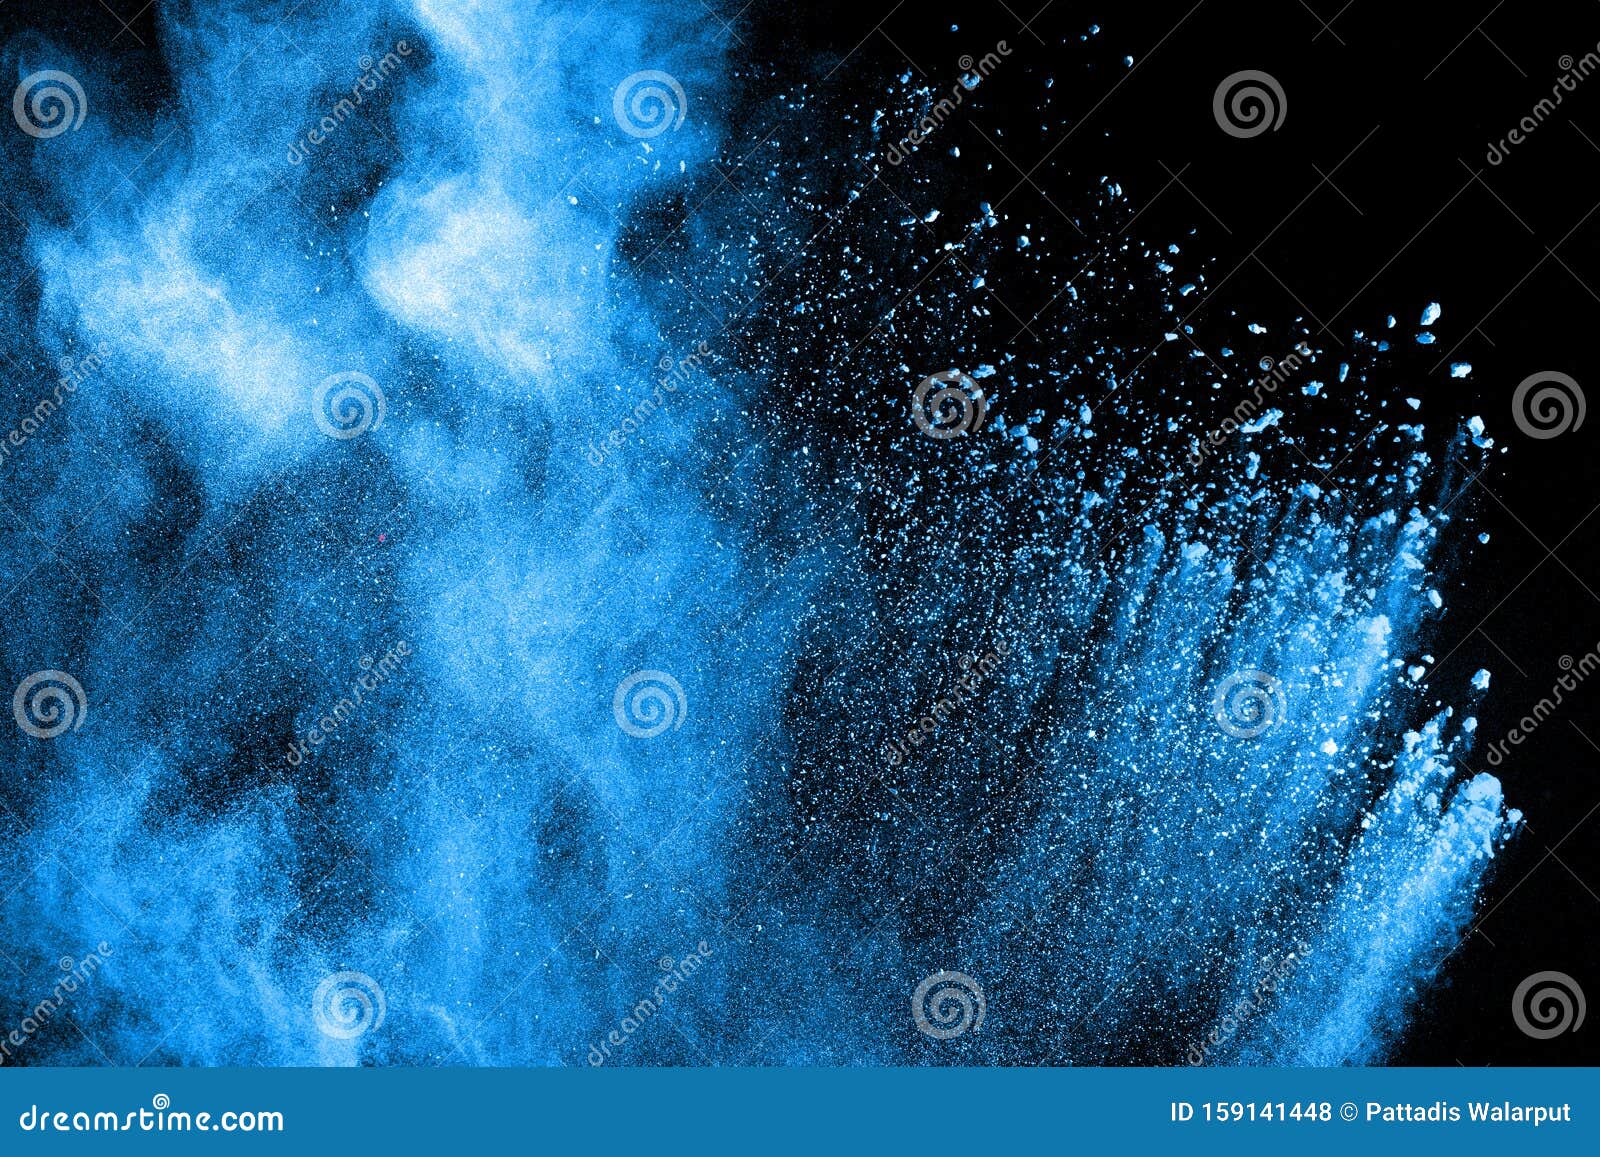 blue powder explode cloud on black background. launched blue dust particles splash on background